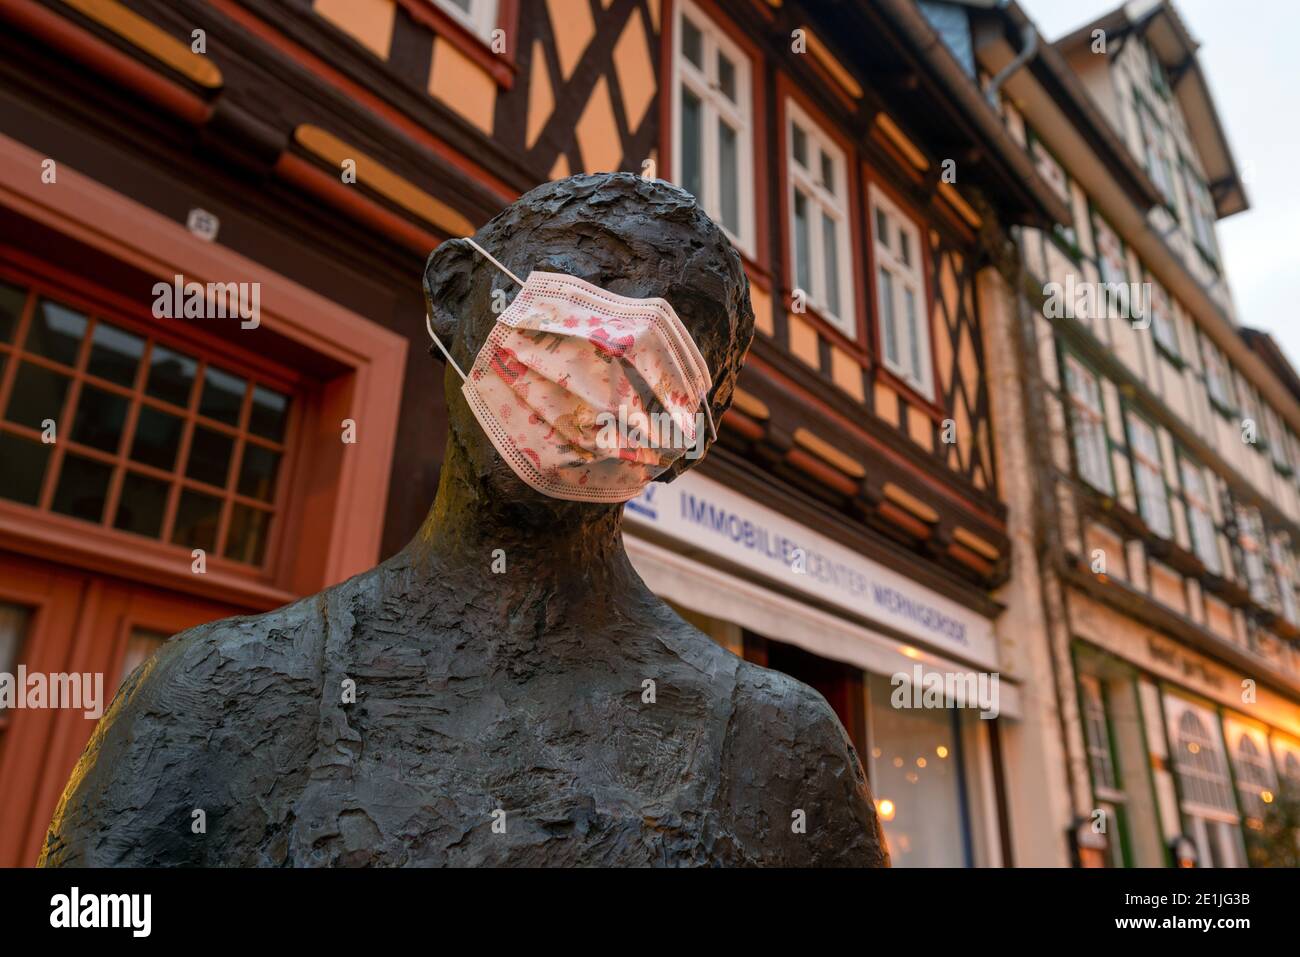 Wernigerode, Germany. 26th Dec, 2020. Someone has put a mask on a bronze figure in the historic old town. Normally, tourists from Germany and abroad visit the half-timbered town of Wernigerode am Harz over the holidays. This year, however, the hotels and streets remain empty because of the Corona pandemic. Credit: Stephan Schulz/dpa-Zentralbild/ZB/dpa/Alamy Live News Stock Photo